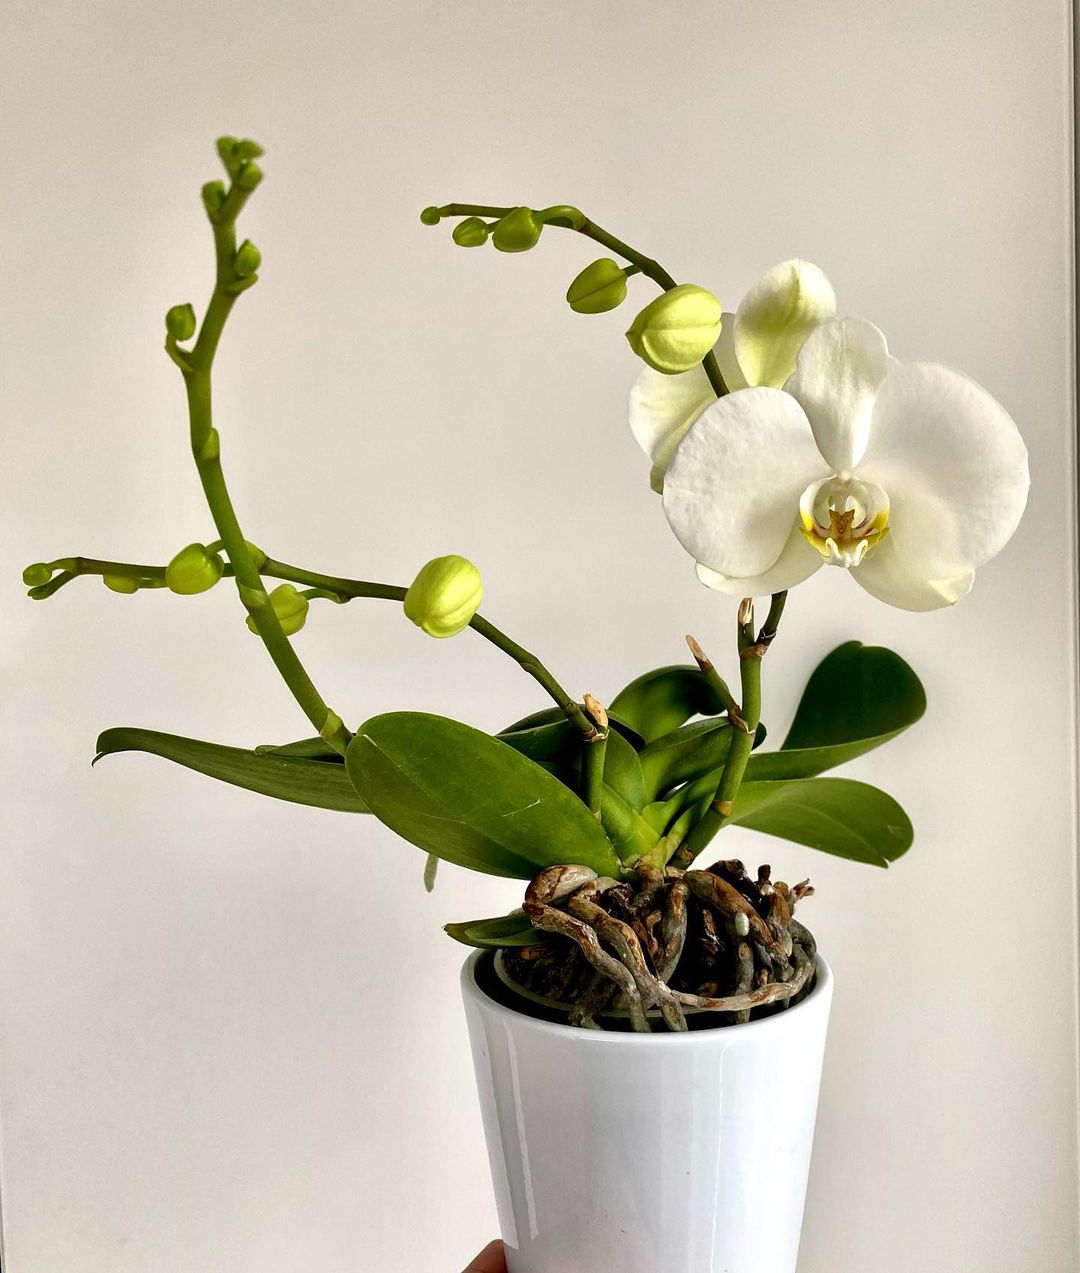 personalized phalaenopsis orchid care: water, light, nutrients